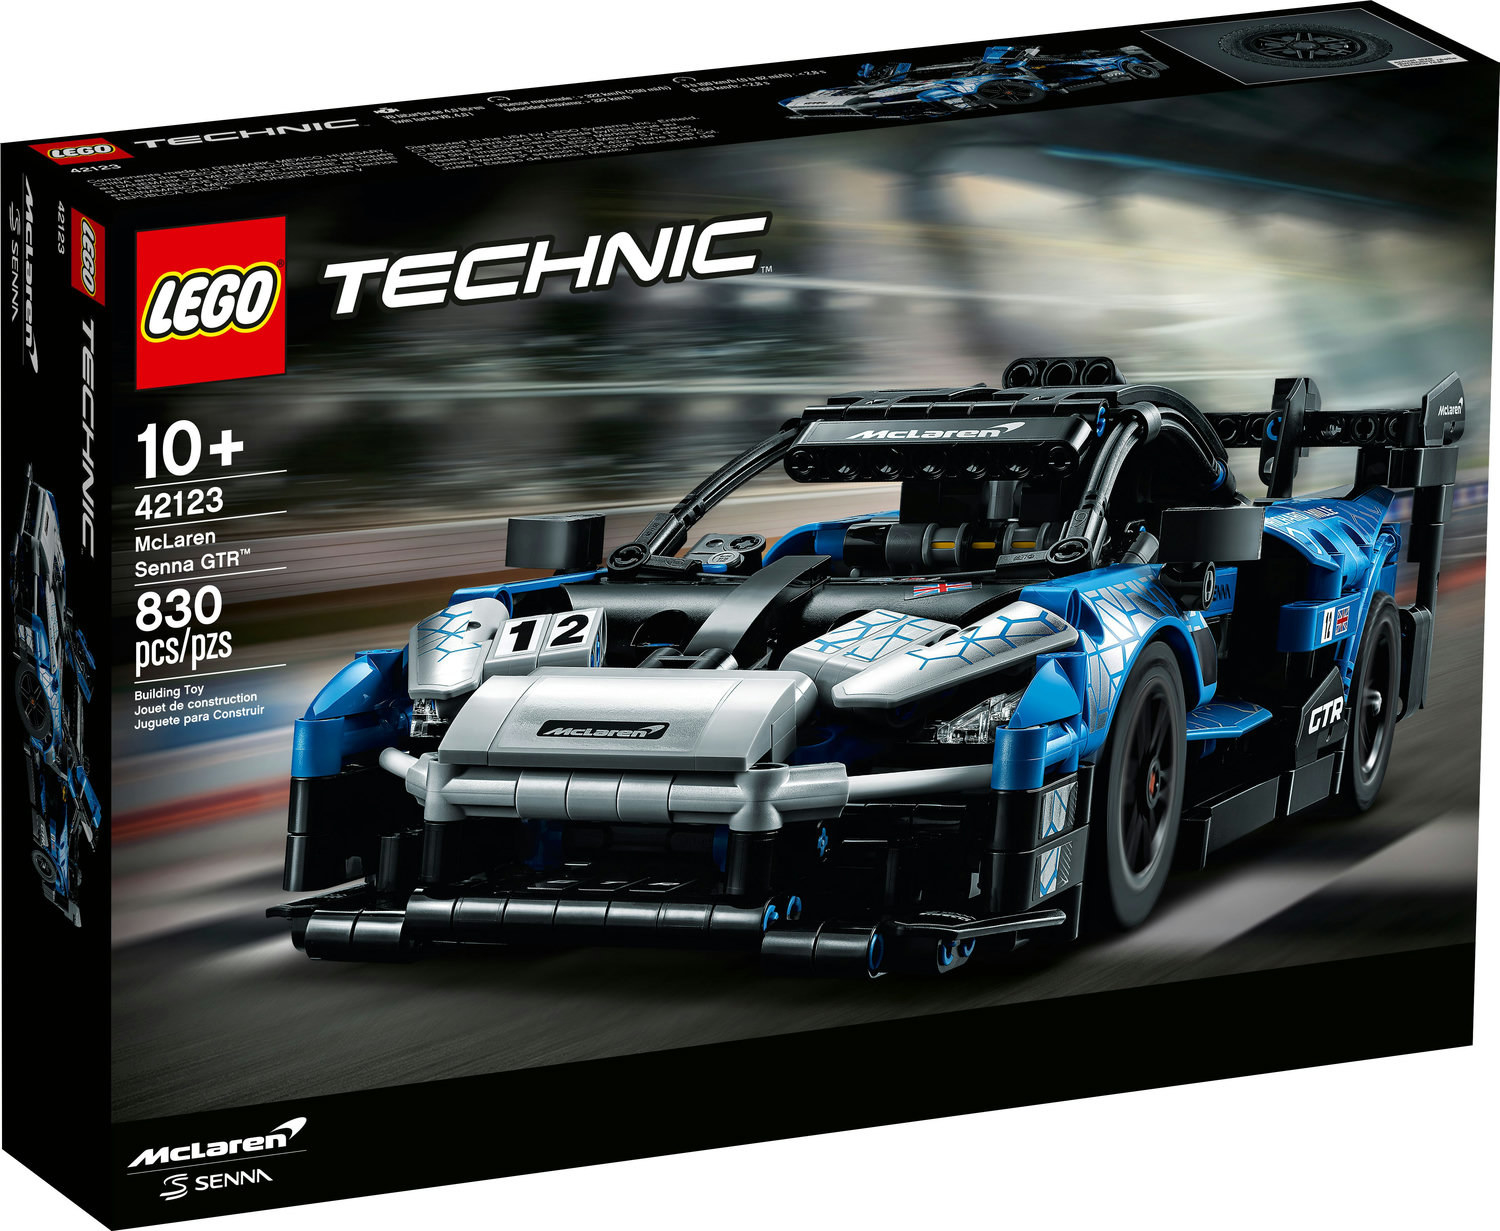 An image of a car LEGO building set with 830 pieces in total